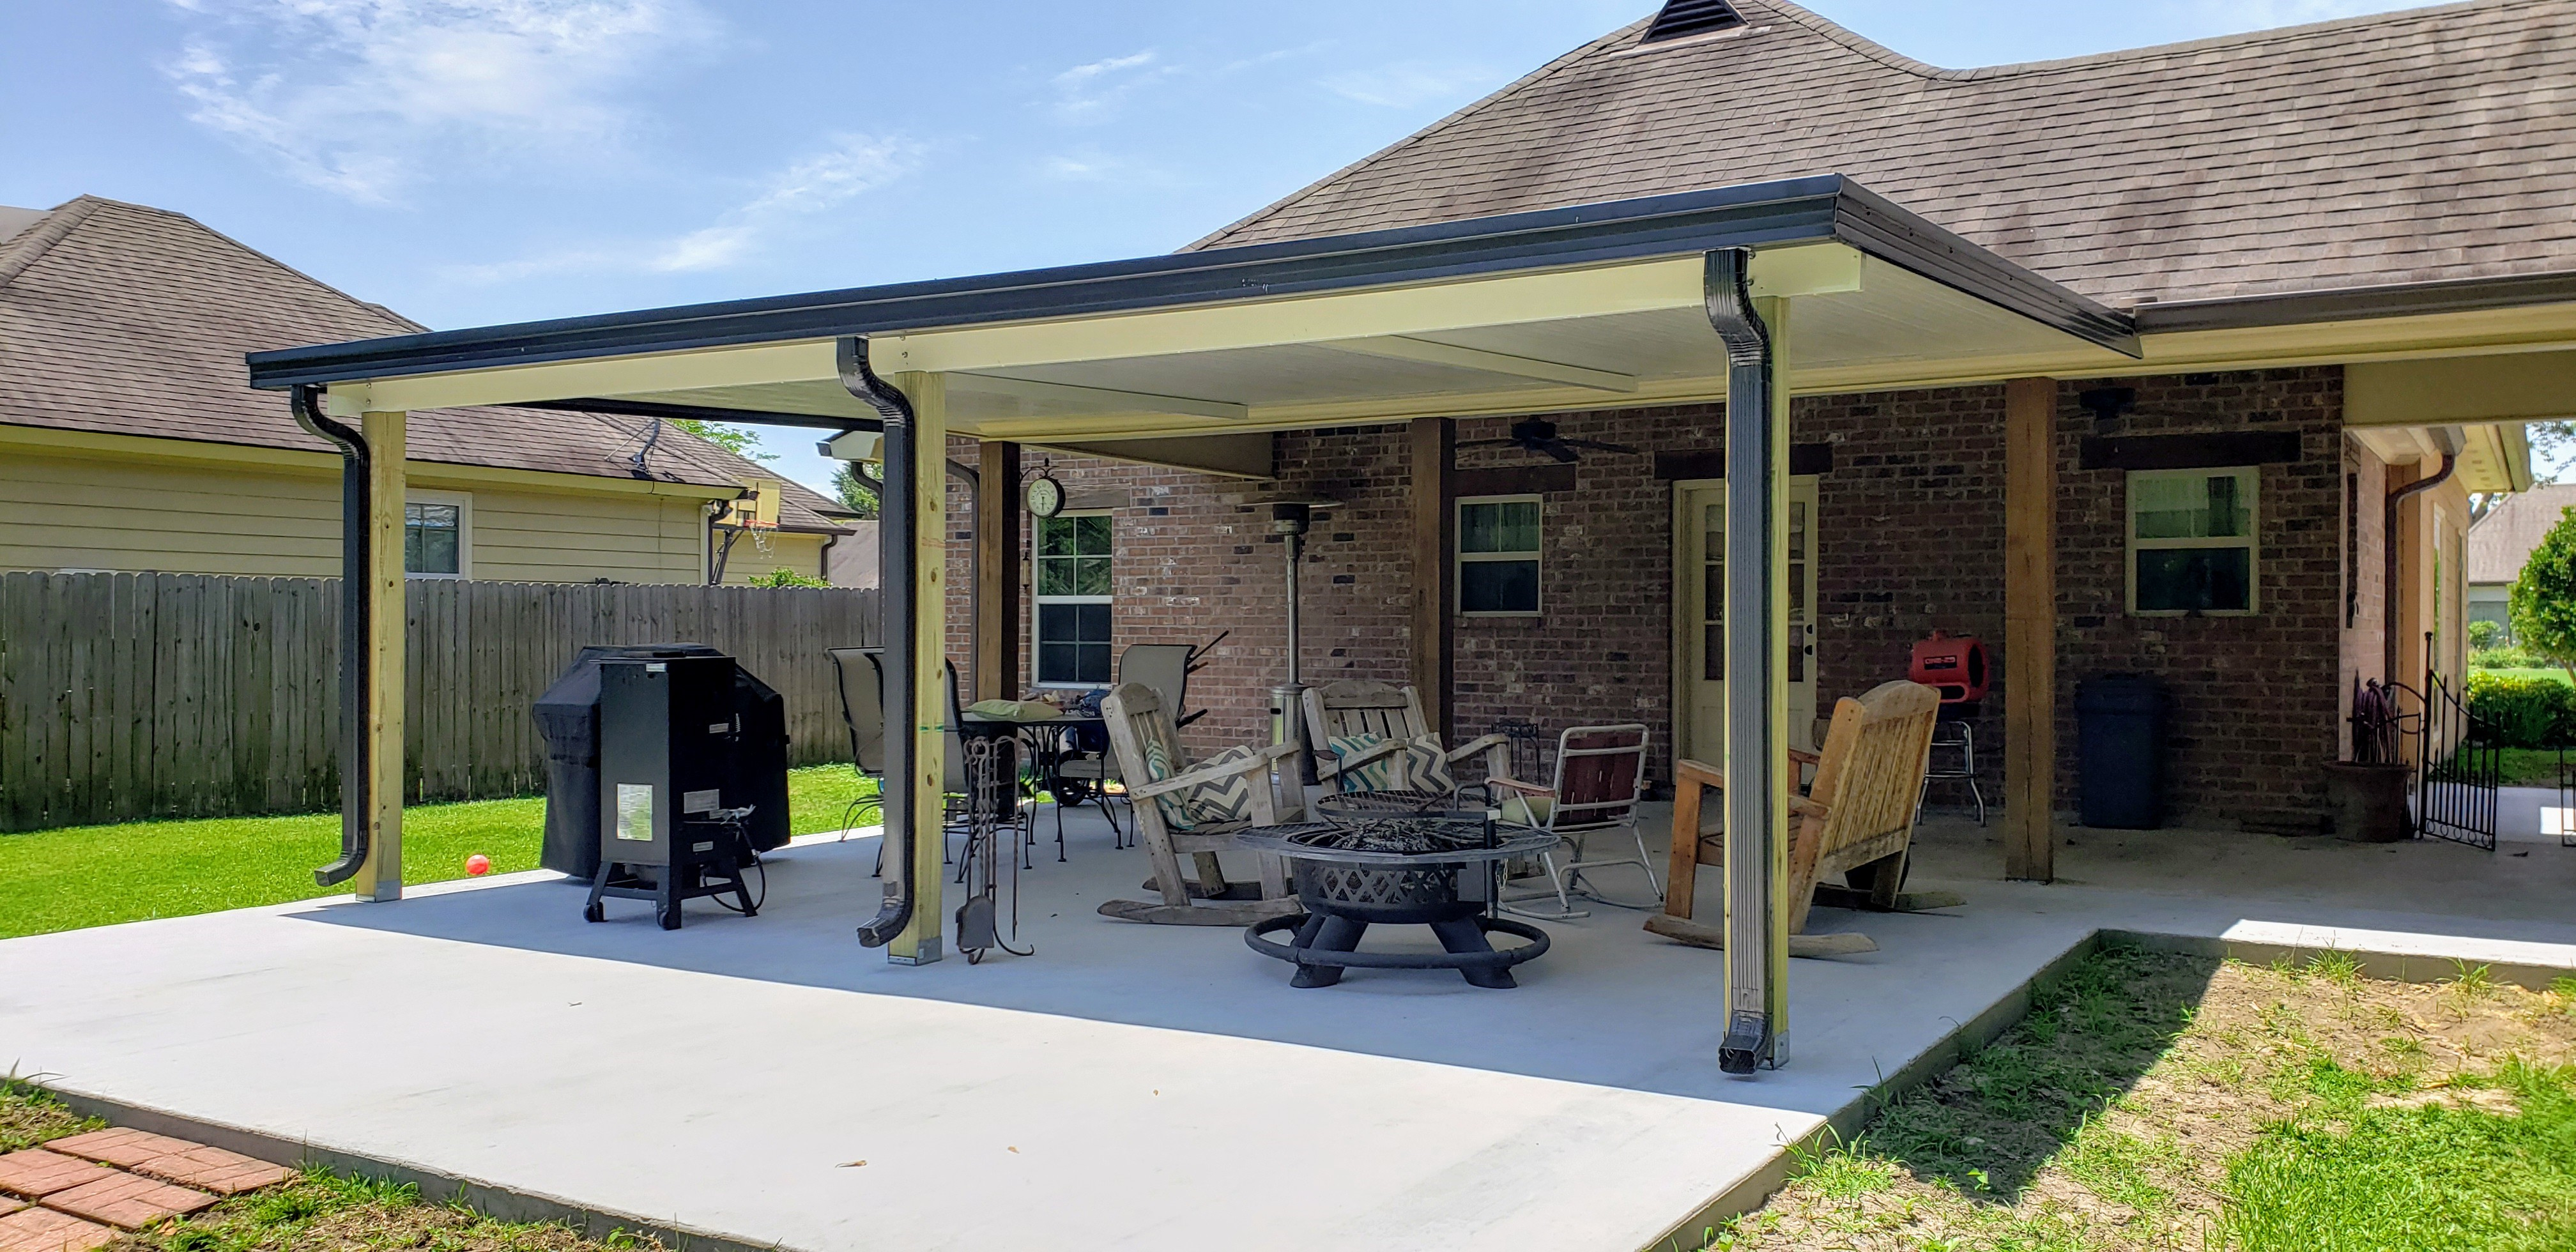 Patio Cover Contractor Lafayette La Liberty Home intended for dimensions 4032 X 1960